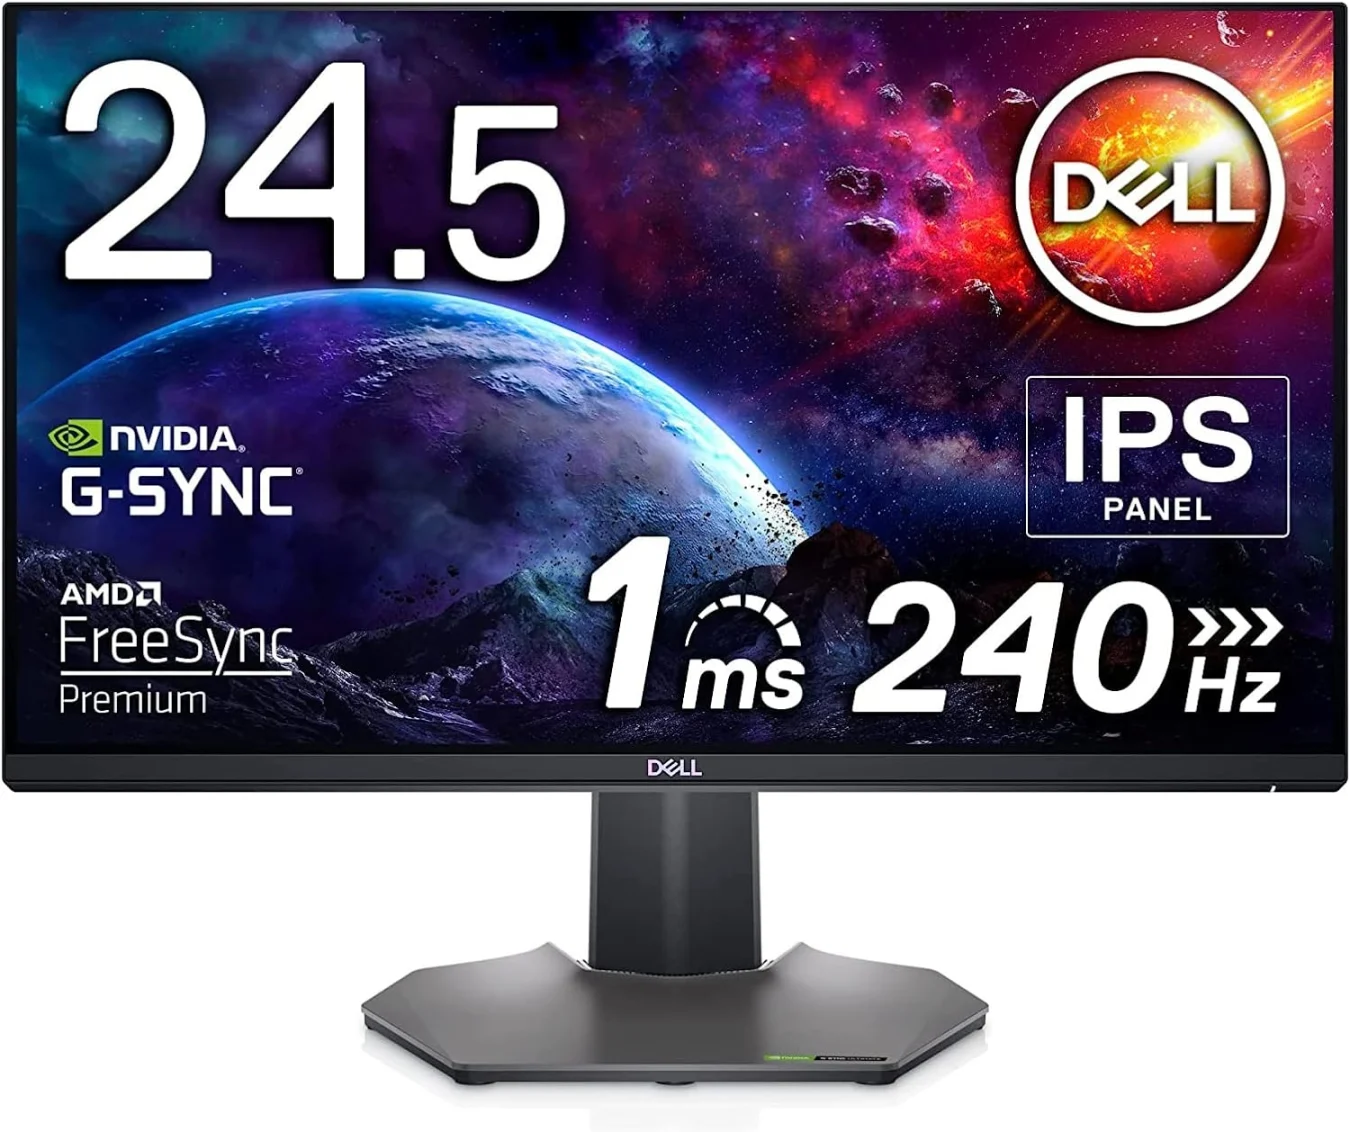 24-inch Dell IPS gaming monitor